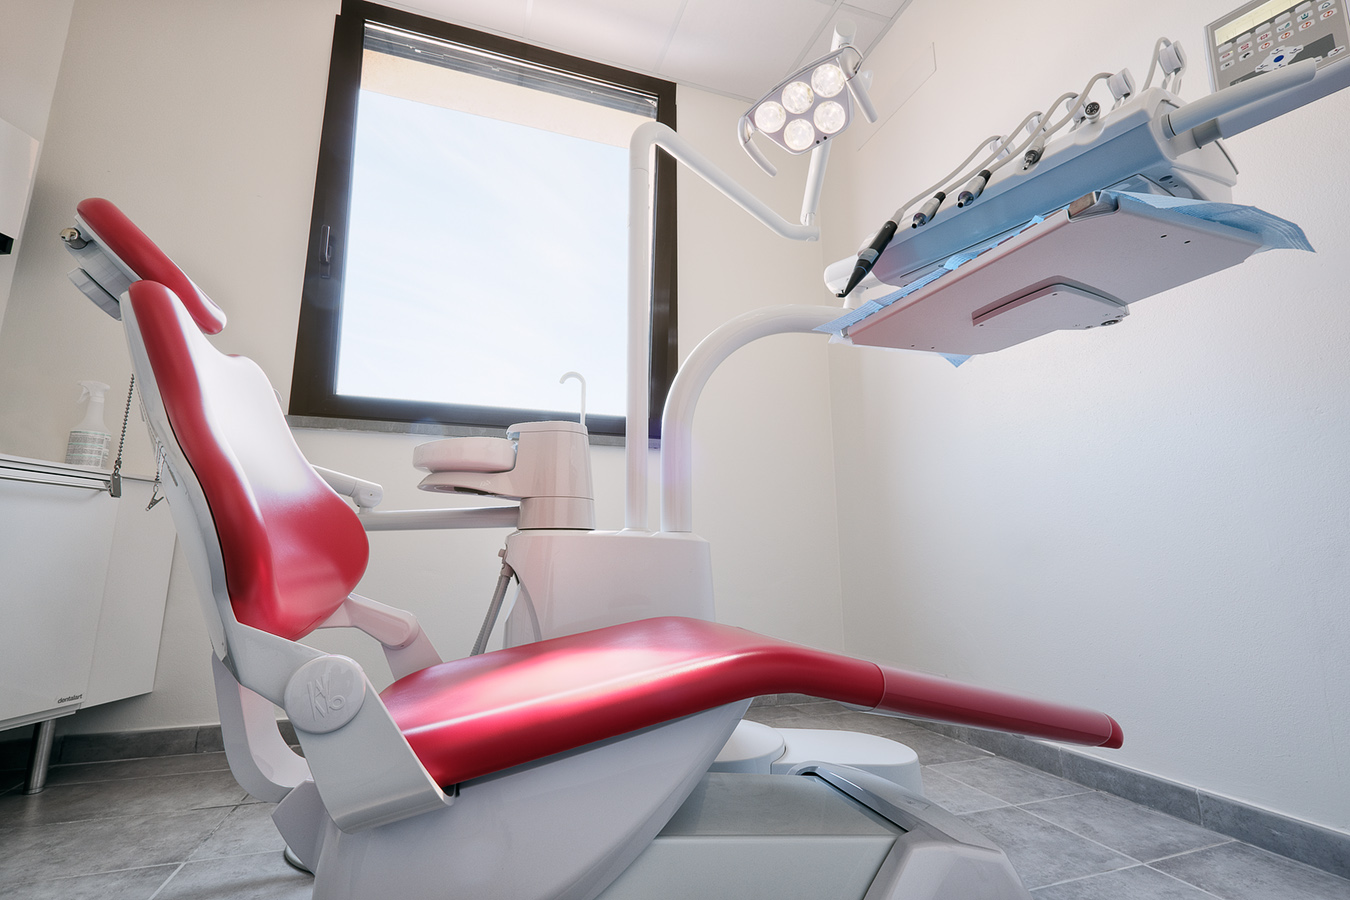 Dental cabinet: dentist's chair and tools. The room has a nice bright window